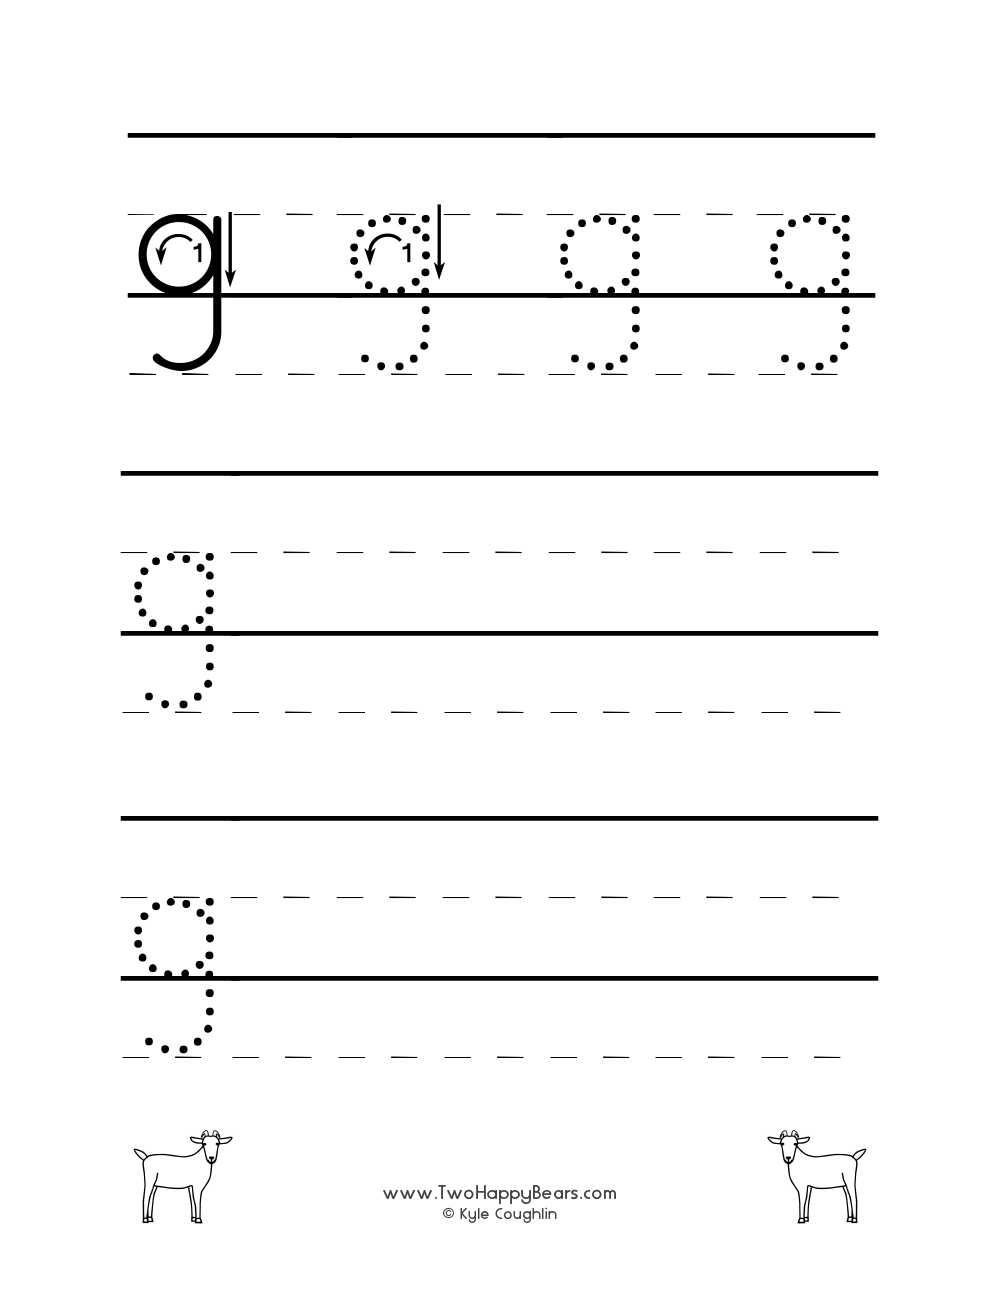 Lowercase letter G worksheet for tracing and drawing